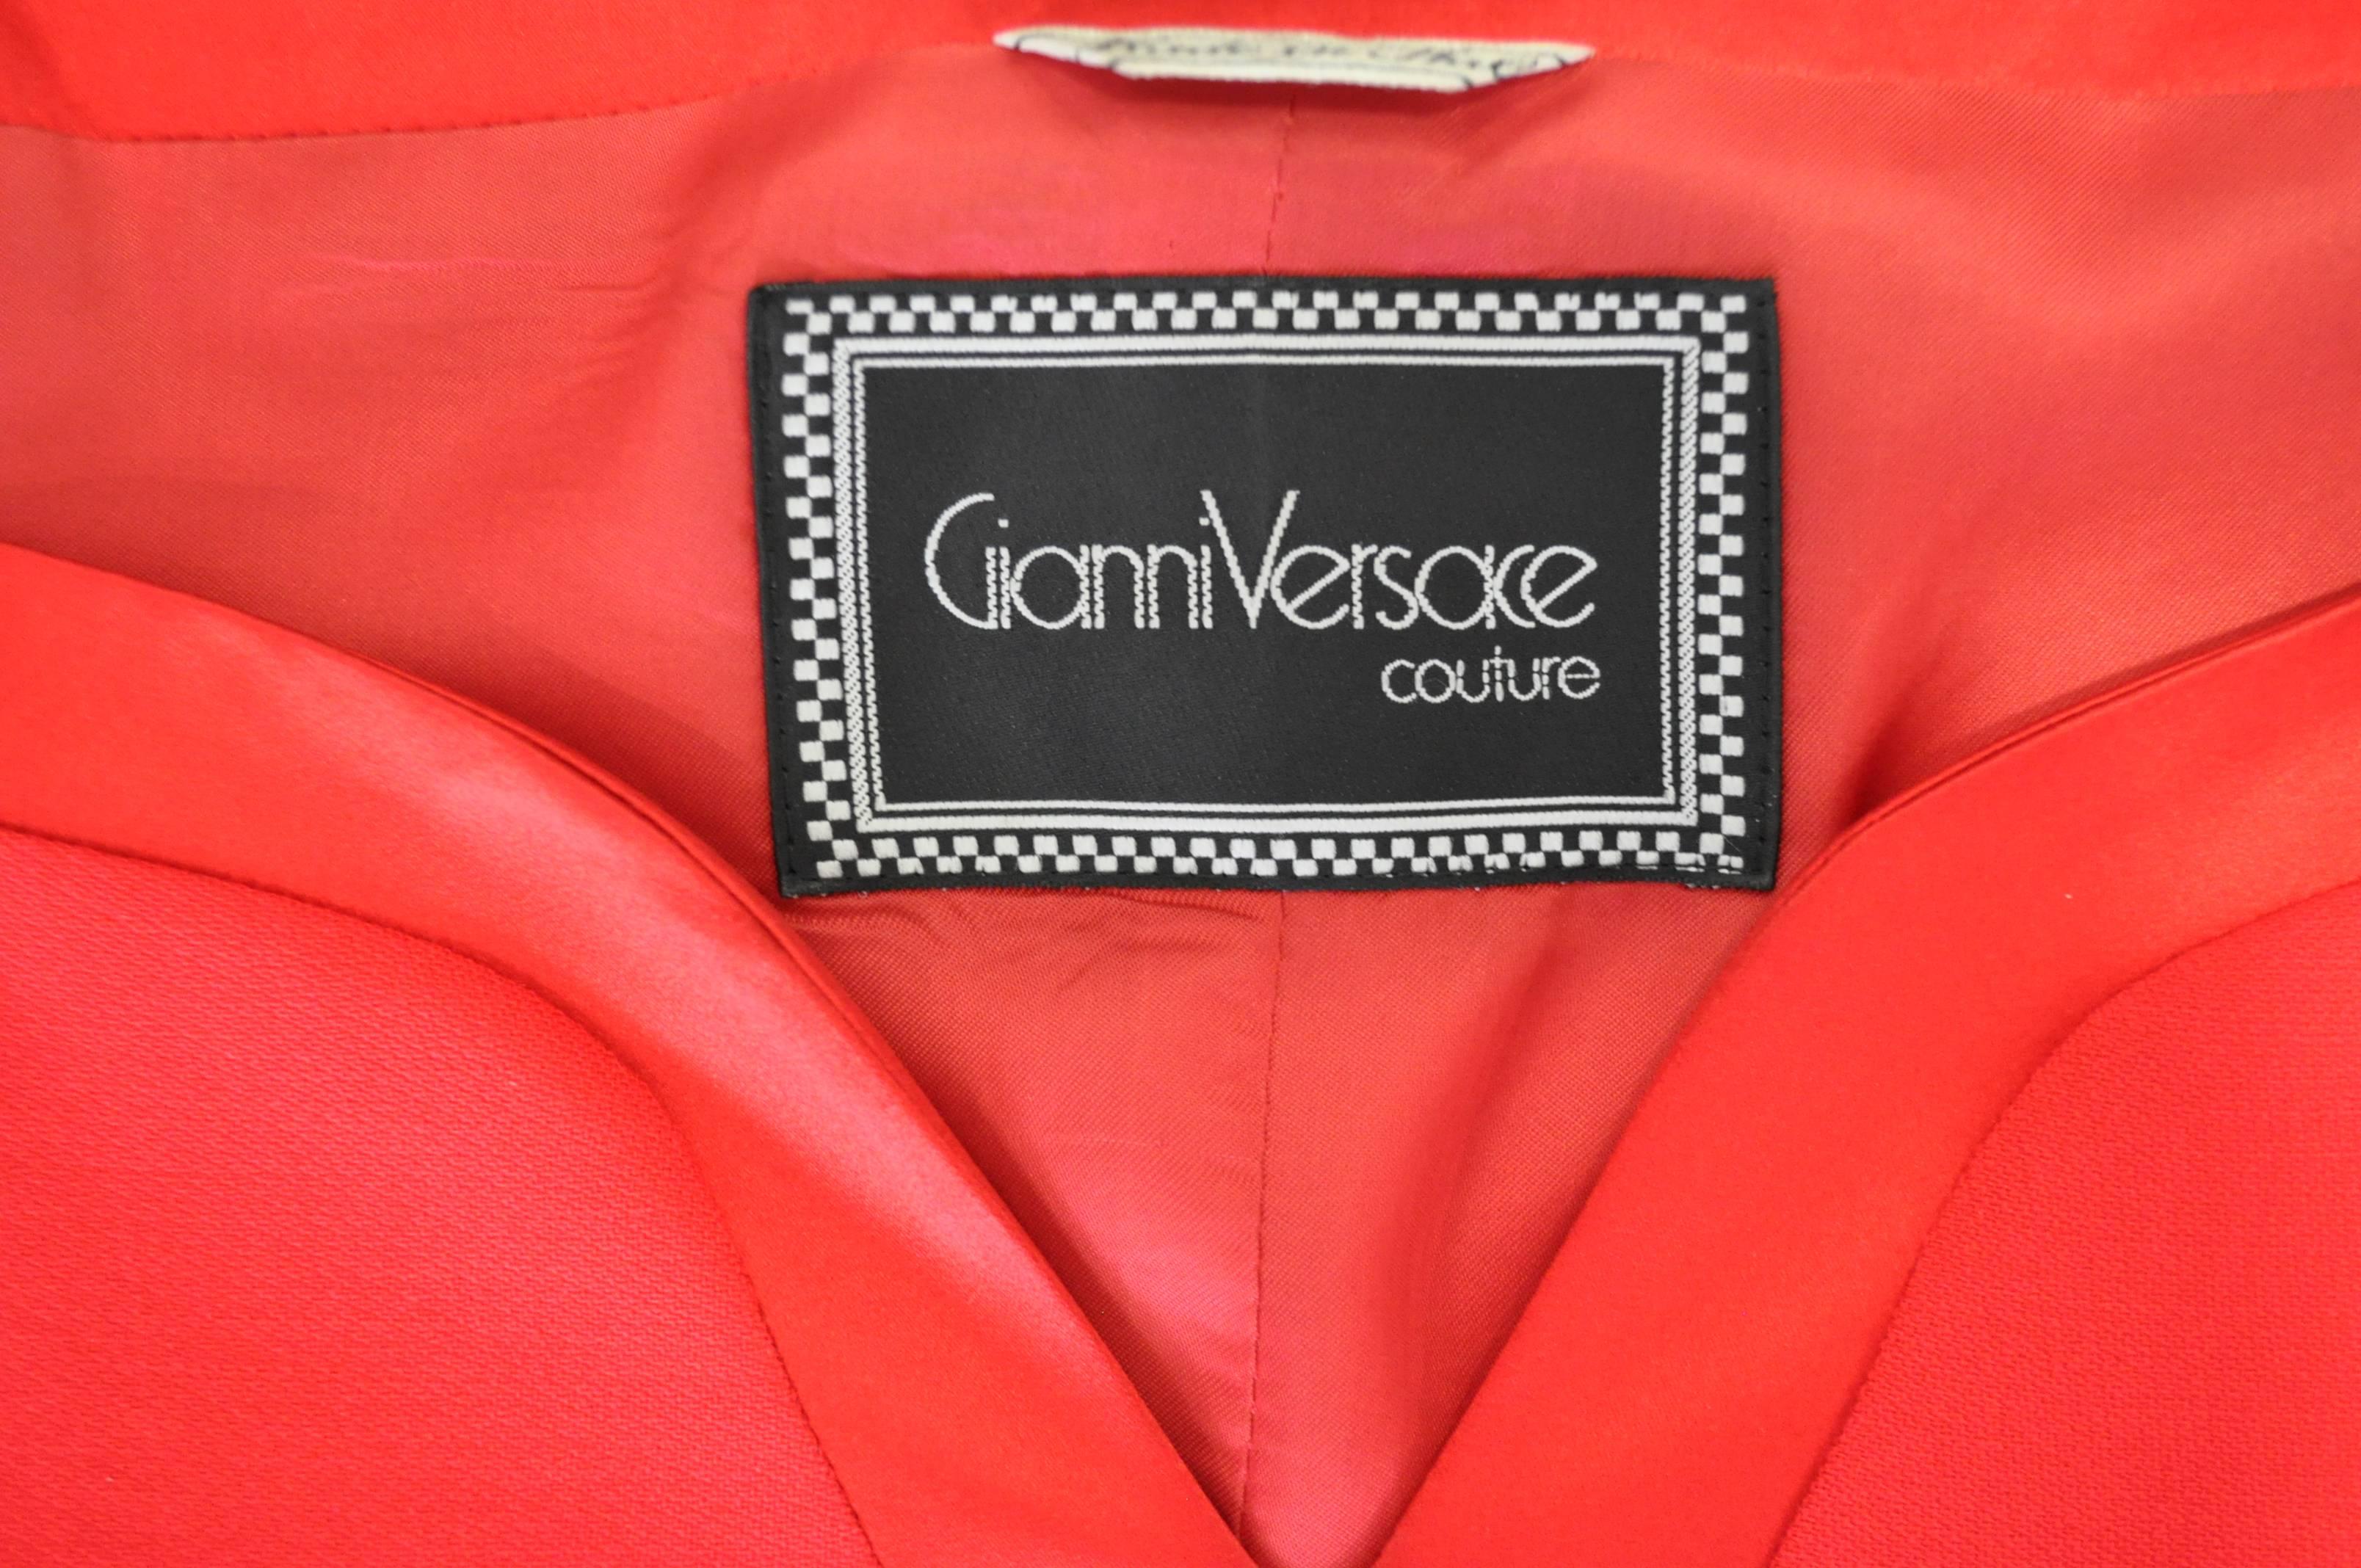 Exquisite Gianni Versace Couture Silk Crepe Cocktail Suit For Sale 3